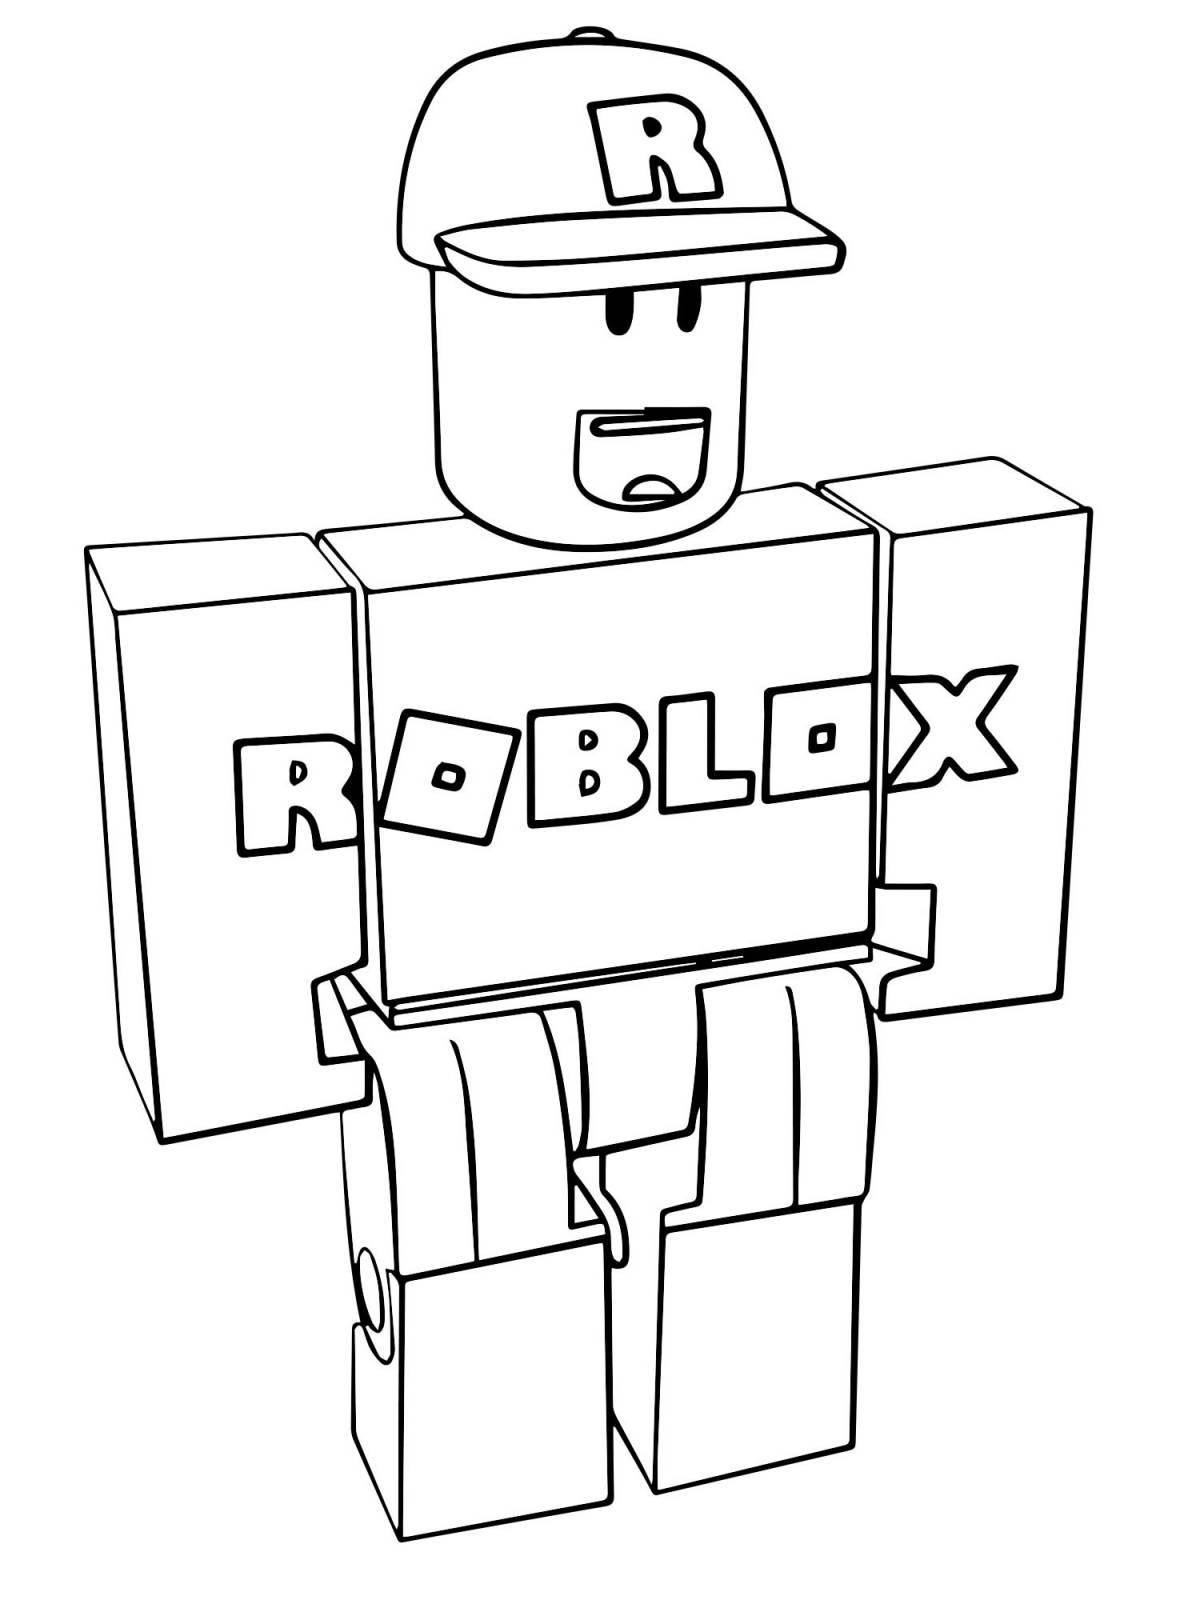 Attractive skins for roblox donors